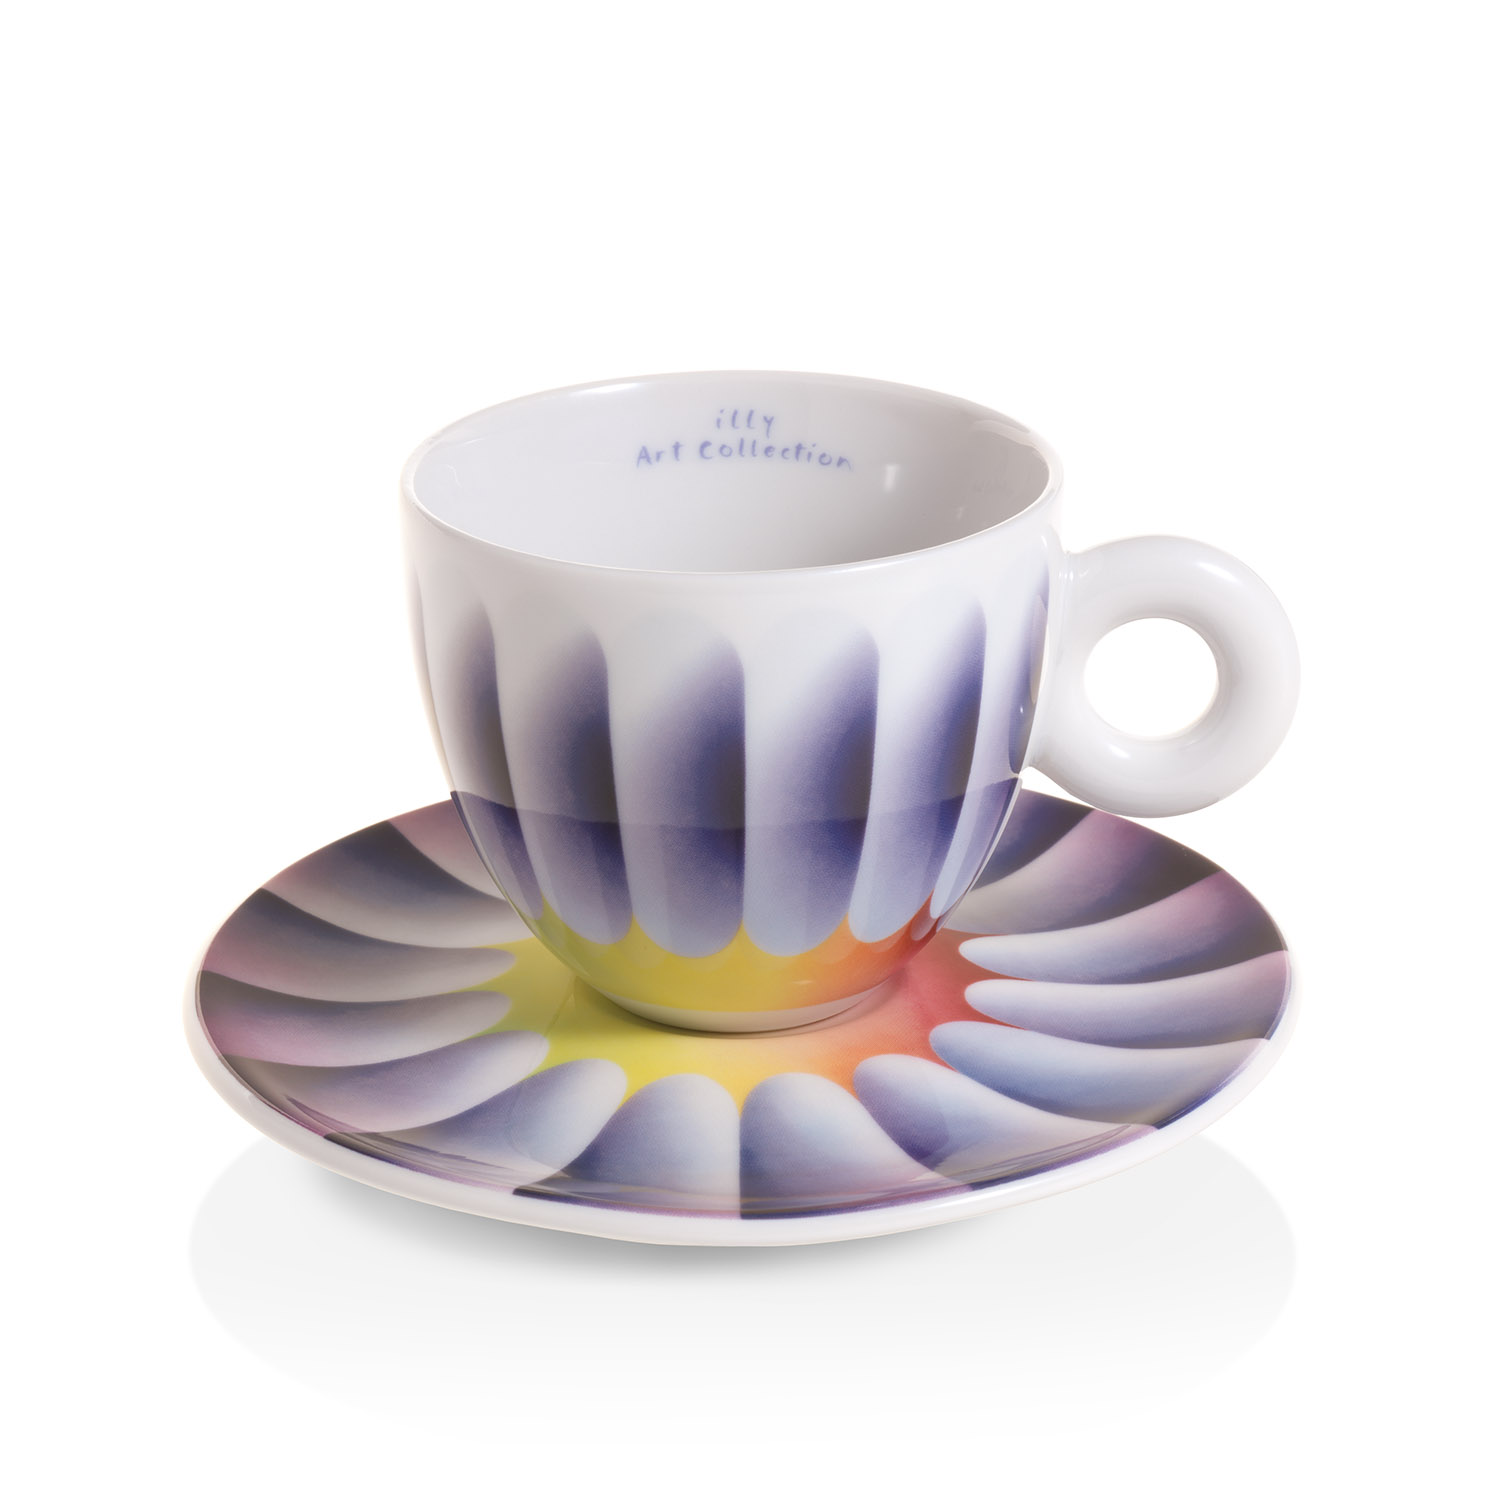 Set of 2 Cappuccino Cups - the Judy Chicago illy Art Collection